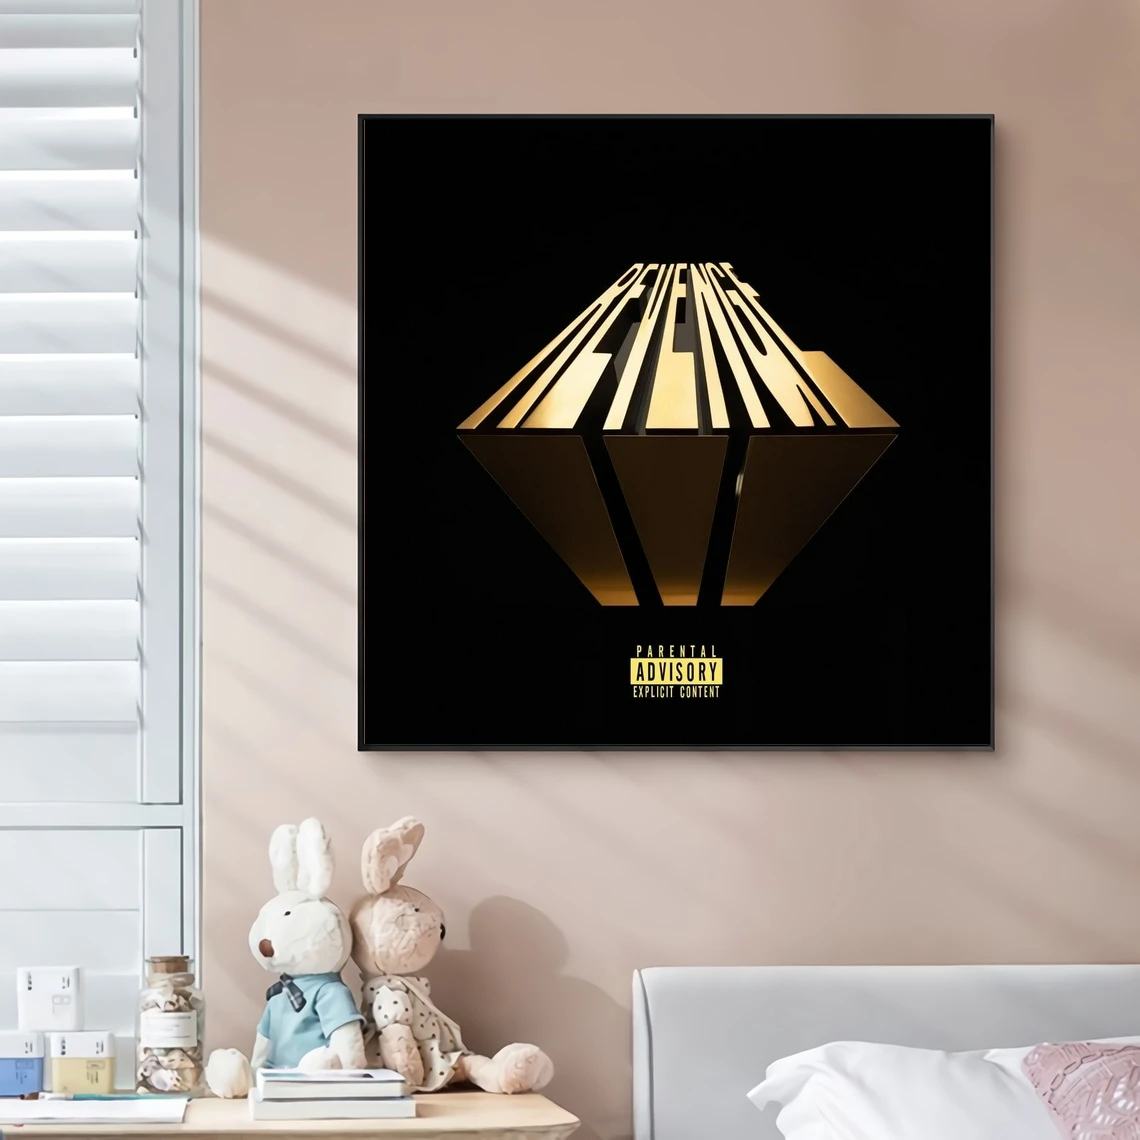 

Dreamville J. Cole Revenge of the Dreamers III Music Album Cover Canvas Poster